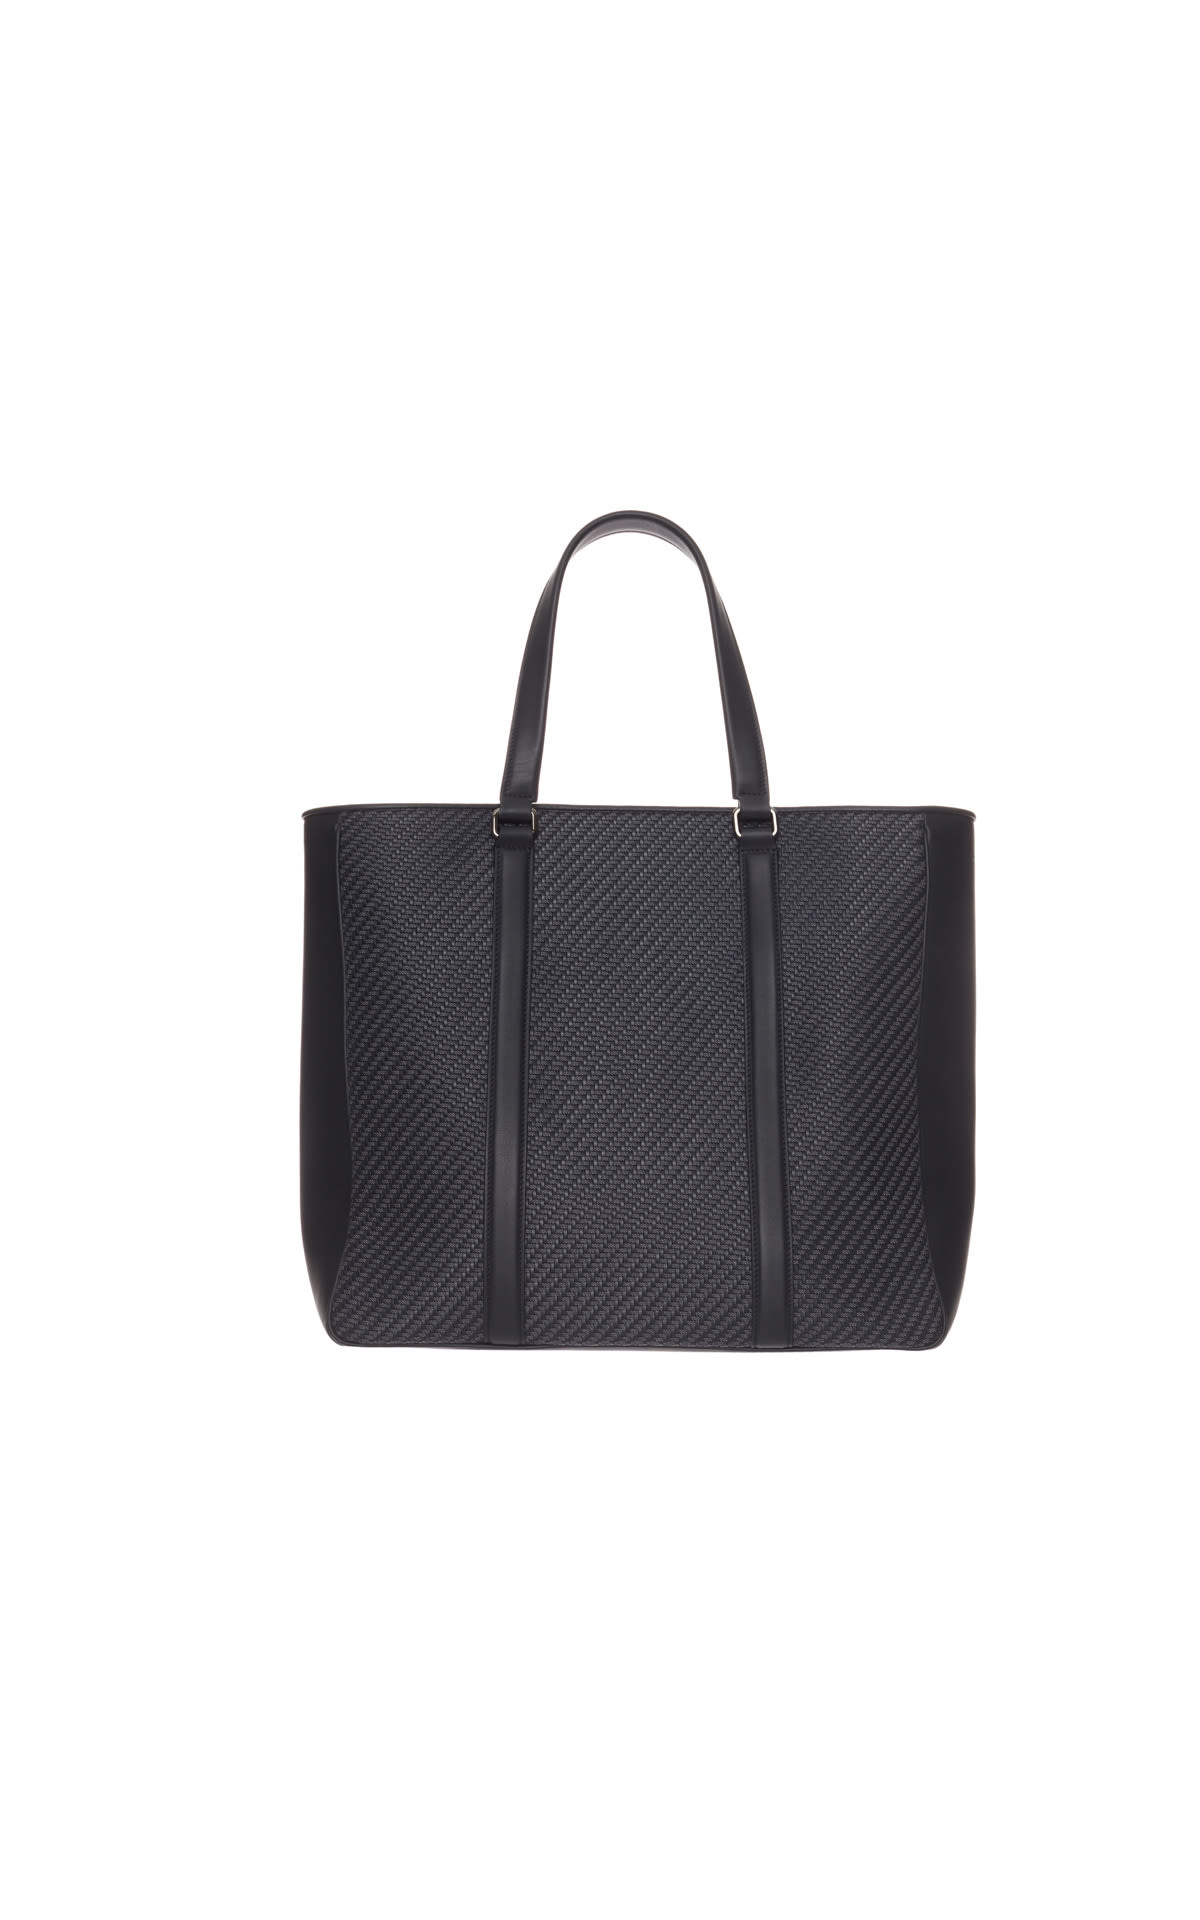 Zegna Male Mens tote bag from BicesterVillage